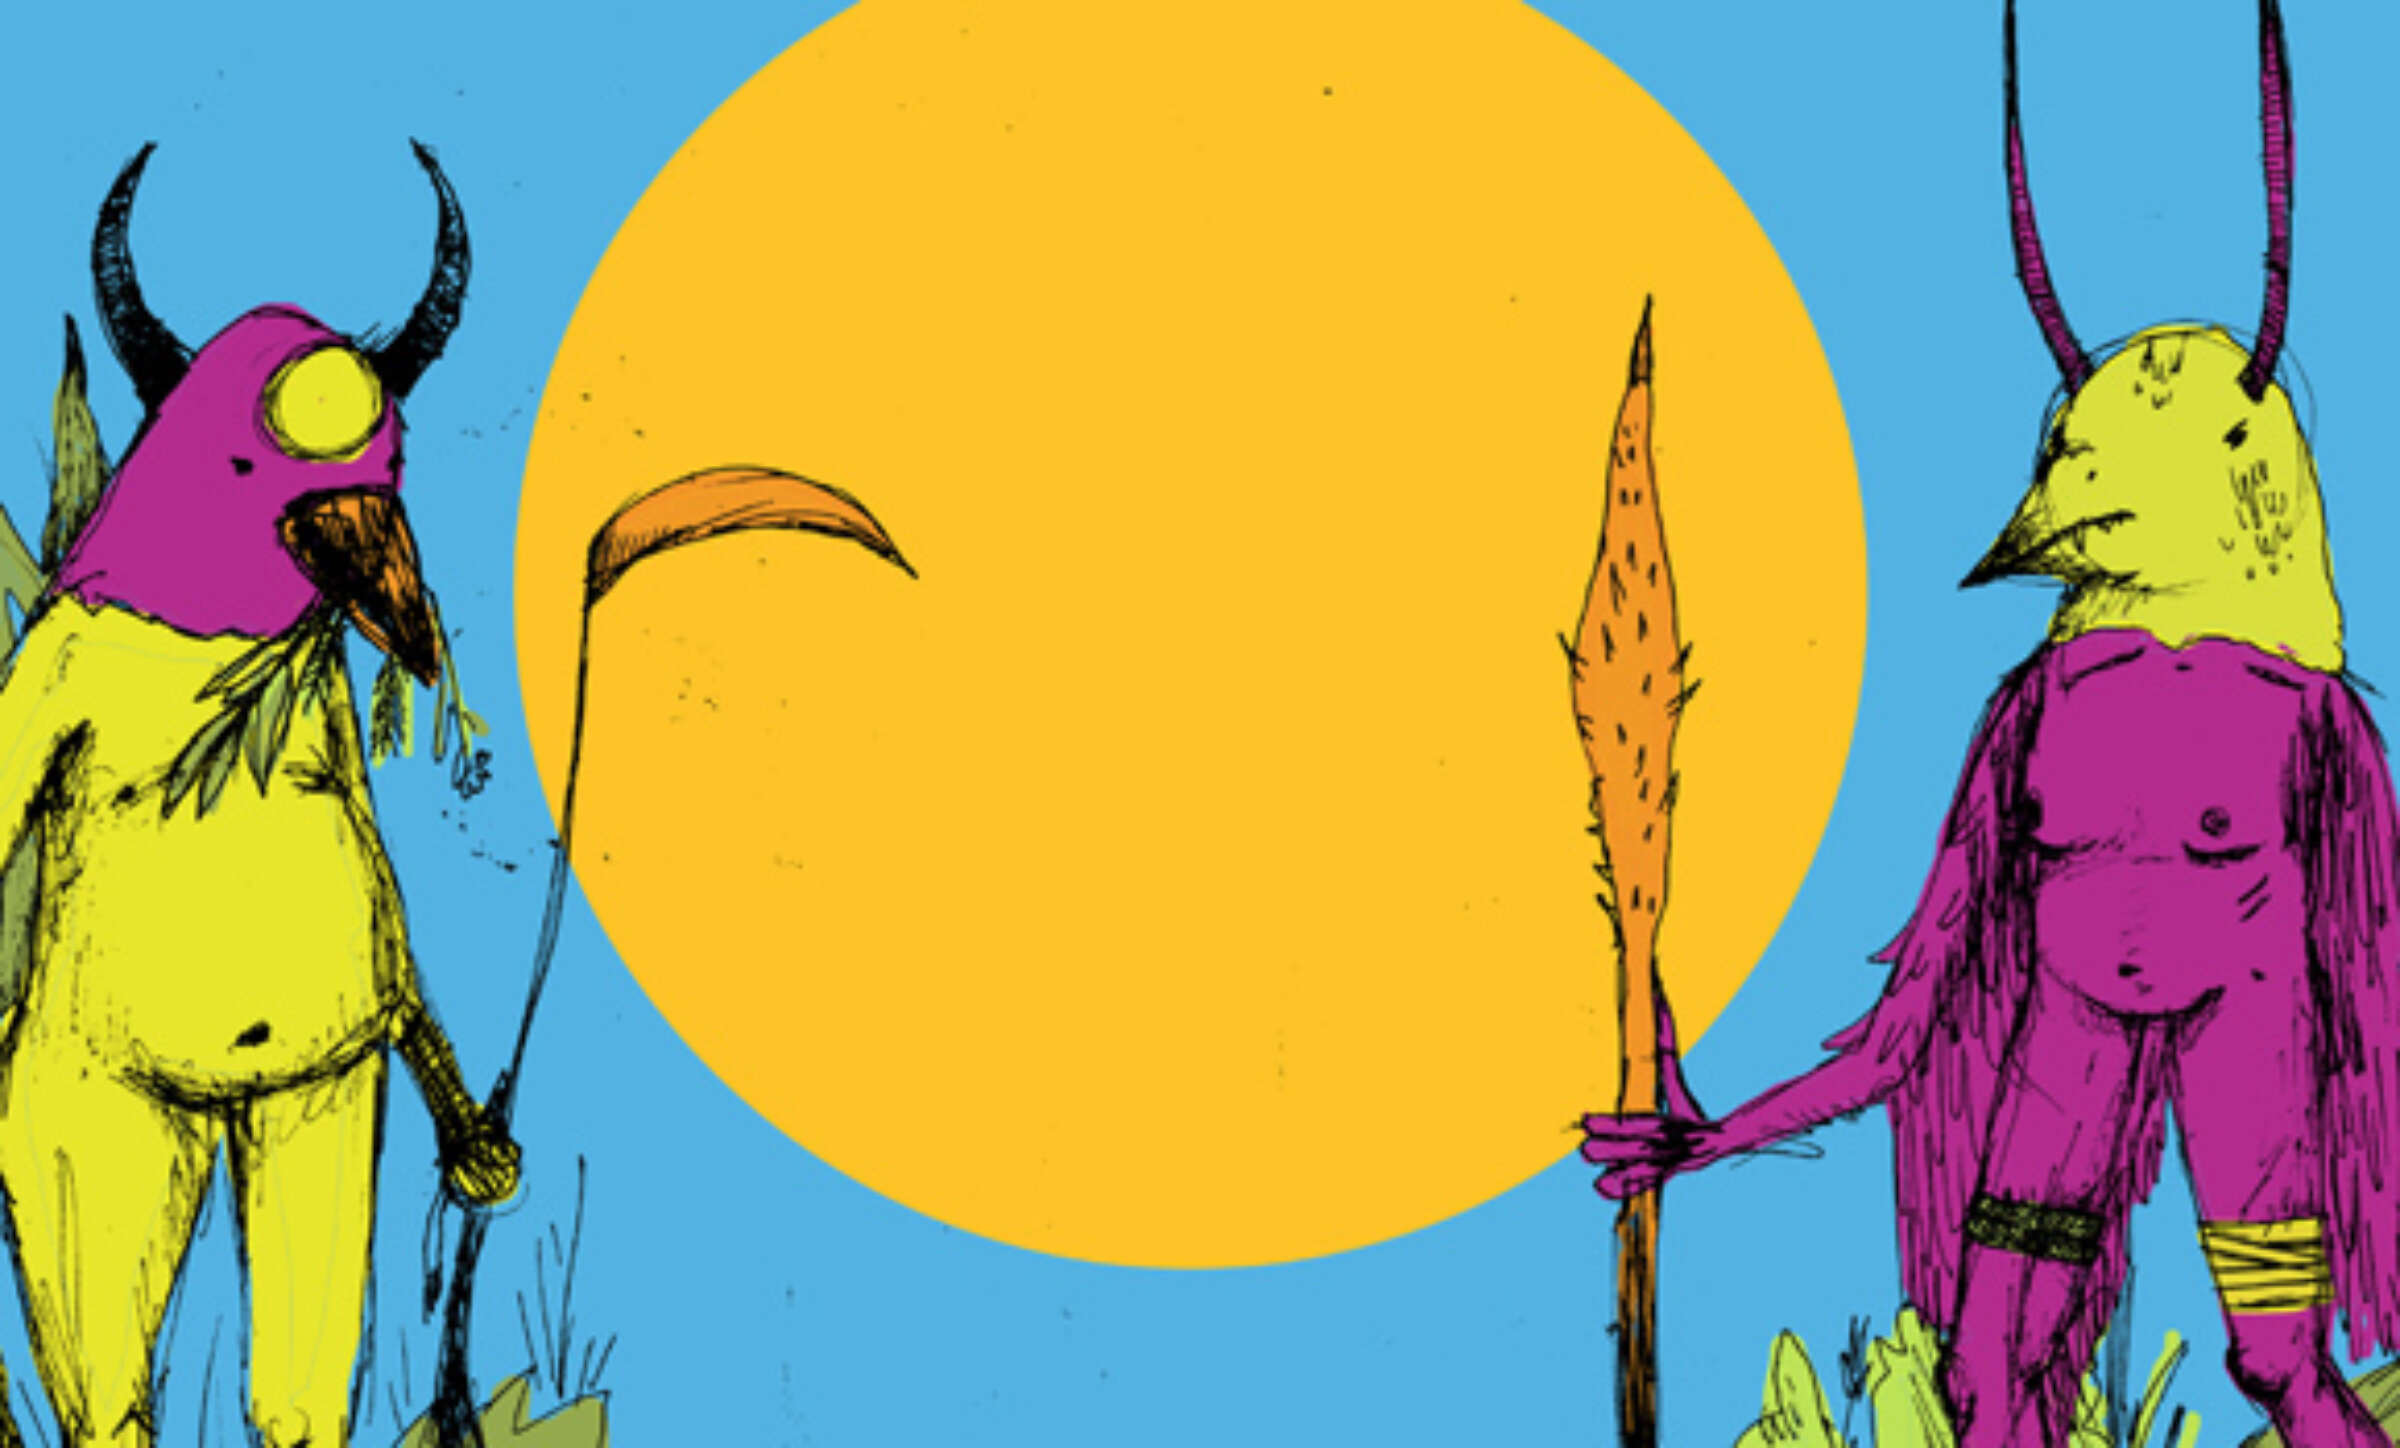 Two abstract, anthropomorphic creatures with bird-like features stand in front of a large yellow circle against a blue background. One has horns and leaf-like feet, holding a curved blade. The other holds a spear with an orange tip and has elongated ears and human-like legs.